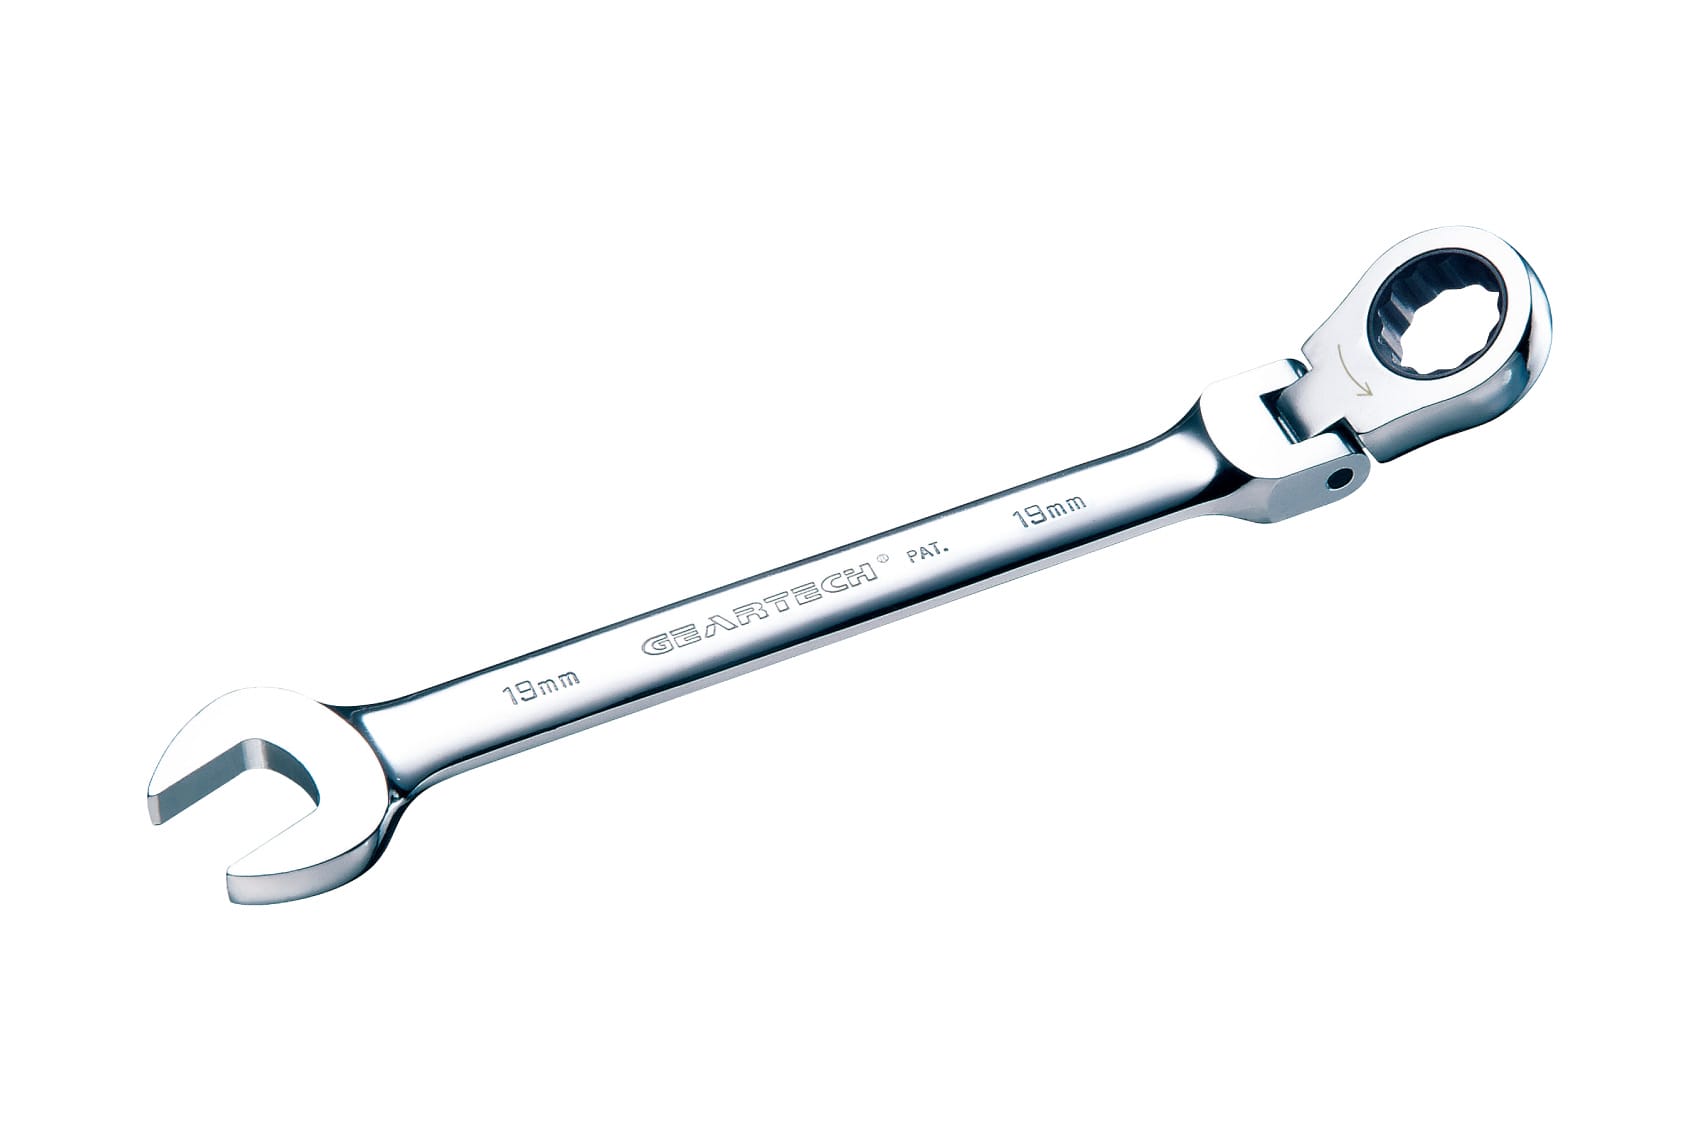 Flex head ratcheting combination wrench